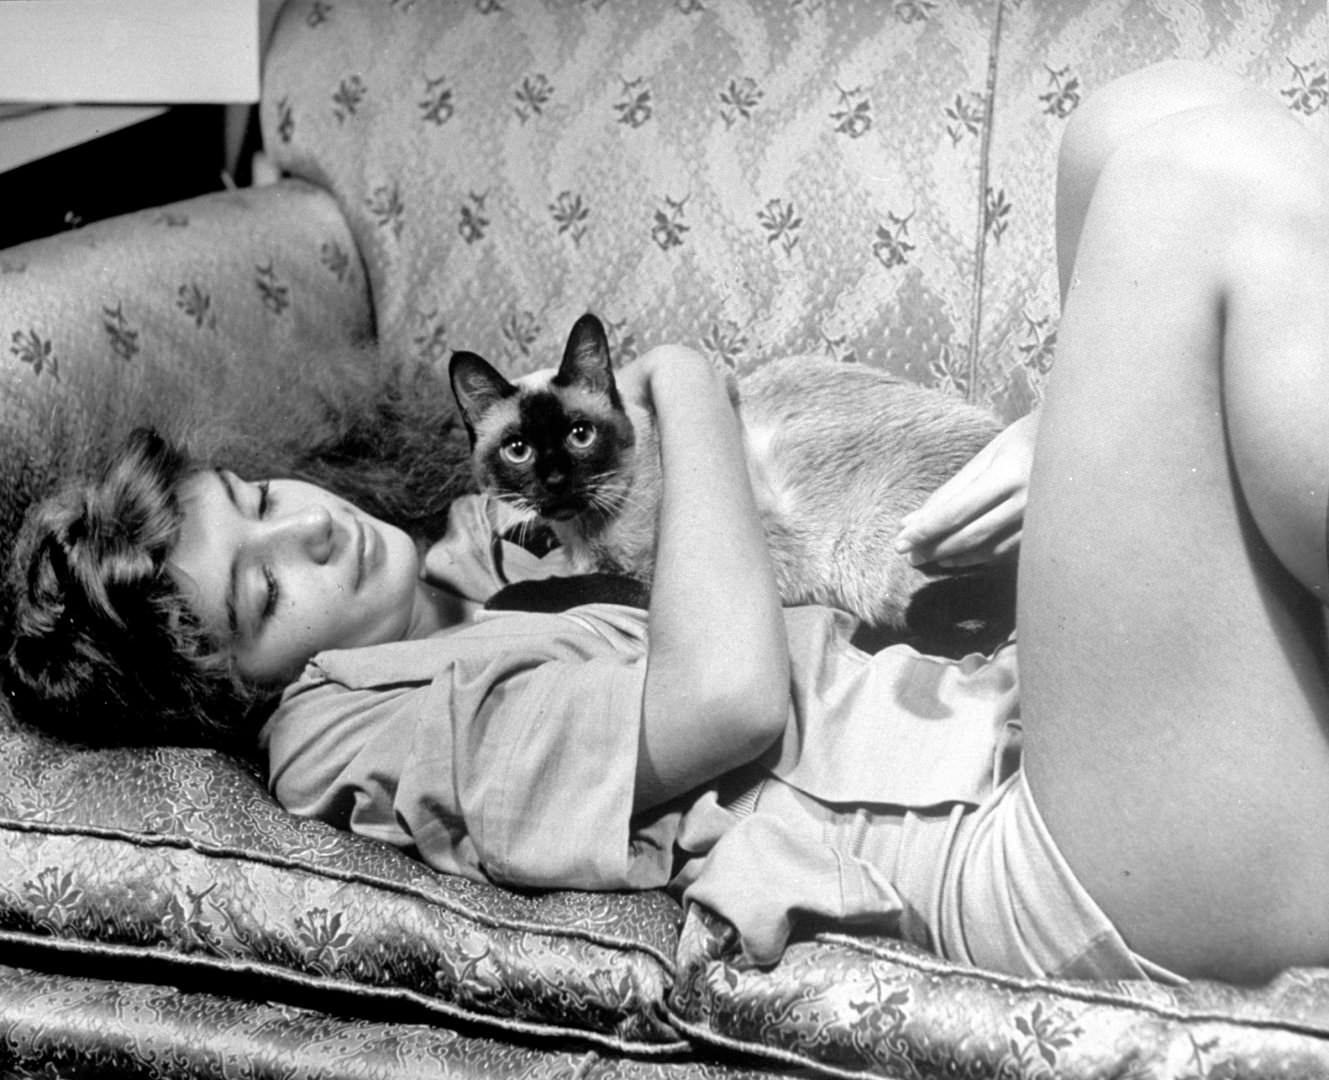 Spiring Ballerina Edwina Seaver Relaxing On Sofa At Home With Siamese Cat Ting Ling, 1940